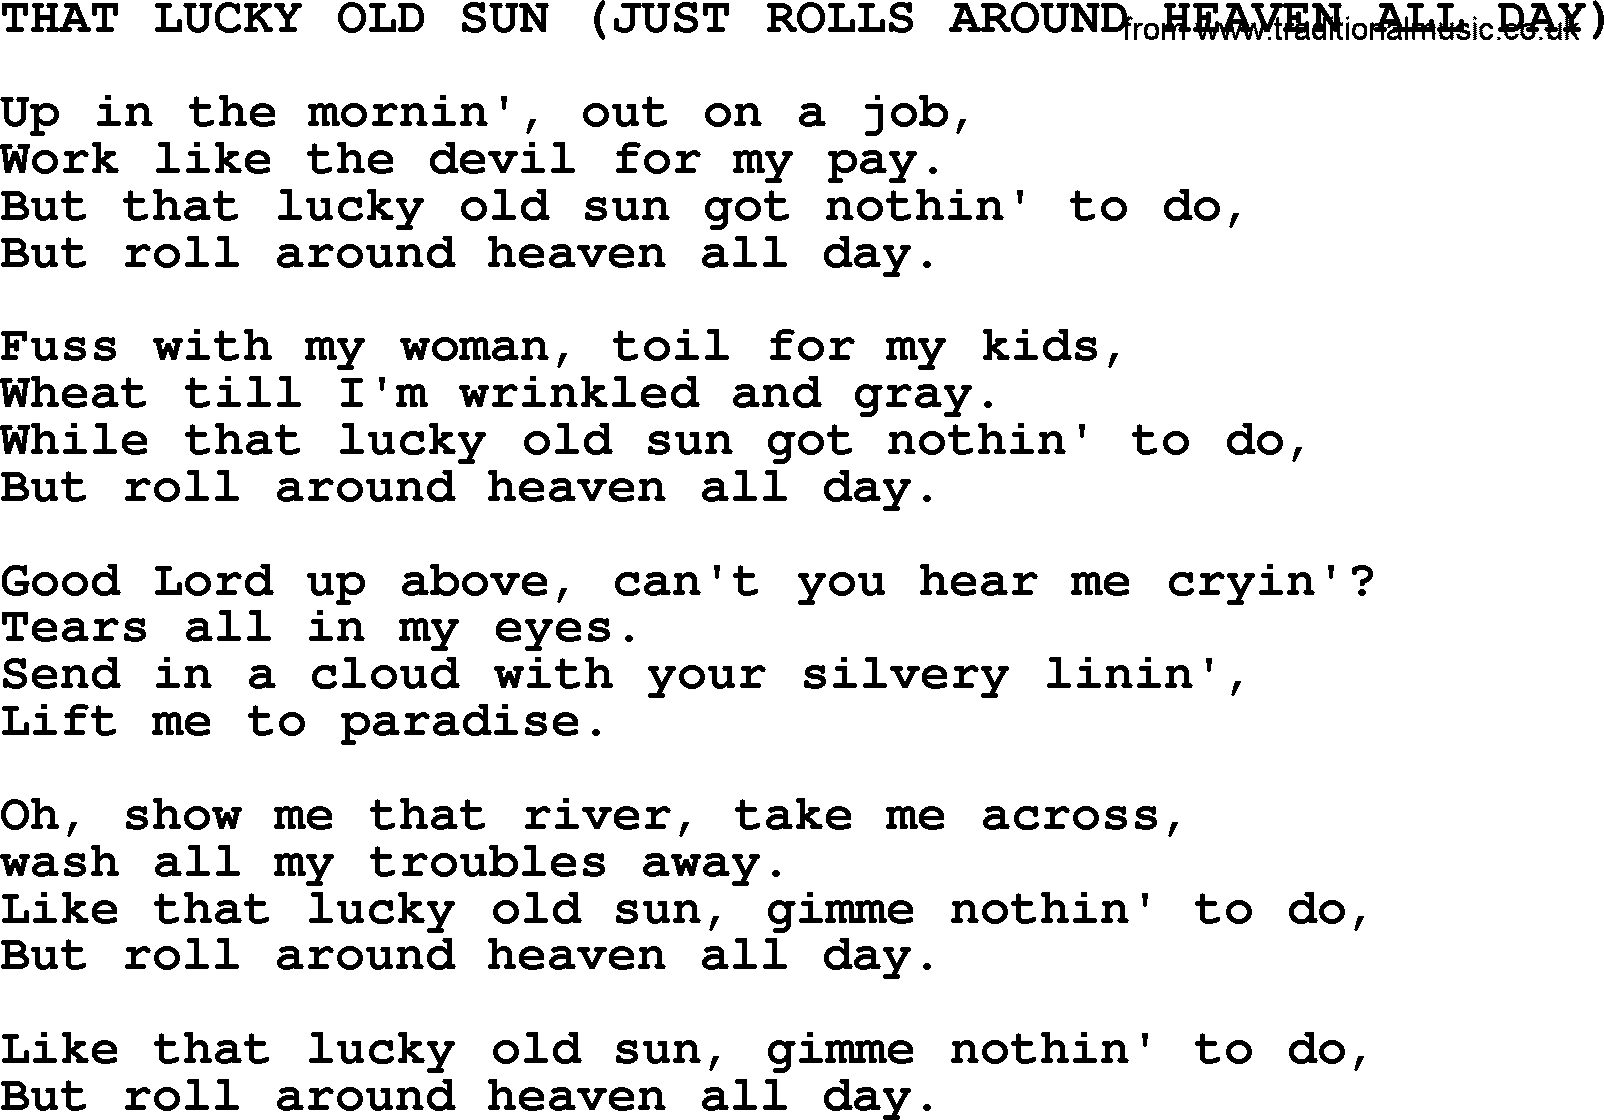 Johnny Cash song That Lucky Old Sun(Just Rolls Around Heaven All Day).txt lyrics